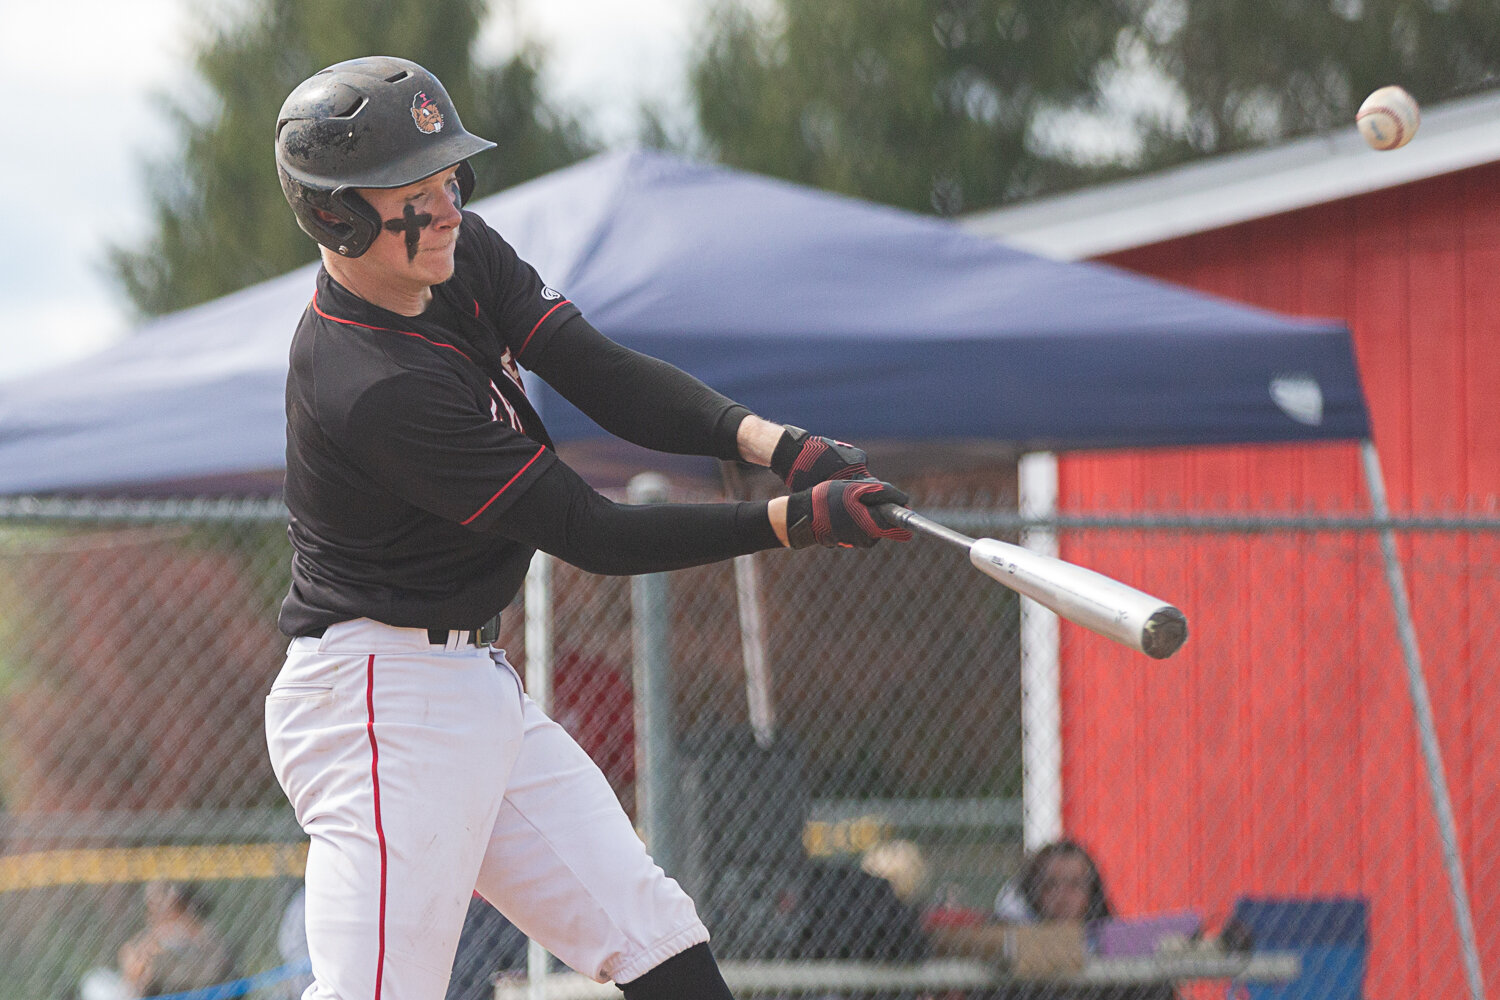 Tenino catcher Austin Gonia makes contact with a pitch against La Center in the 1A District 4 semifinals May 9 at Castle Rock.